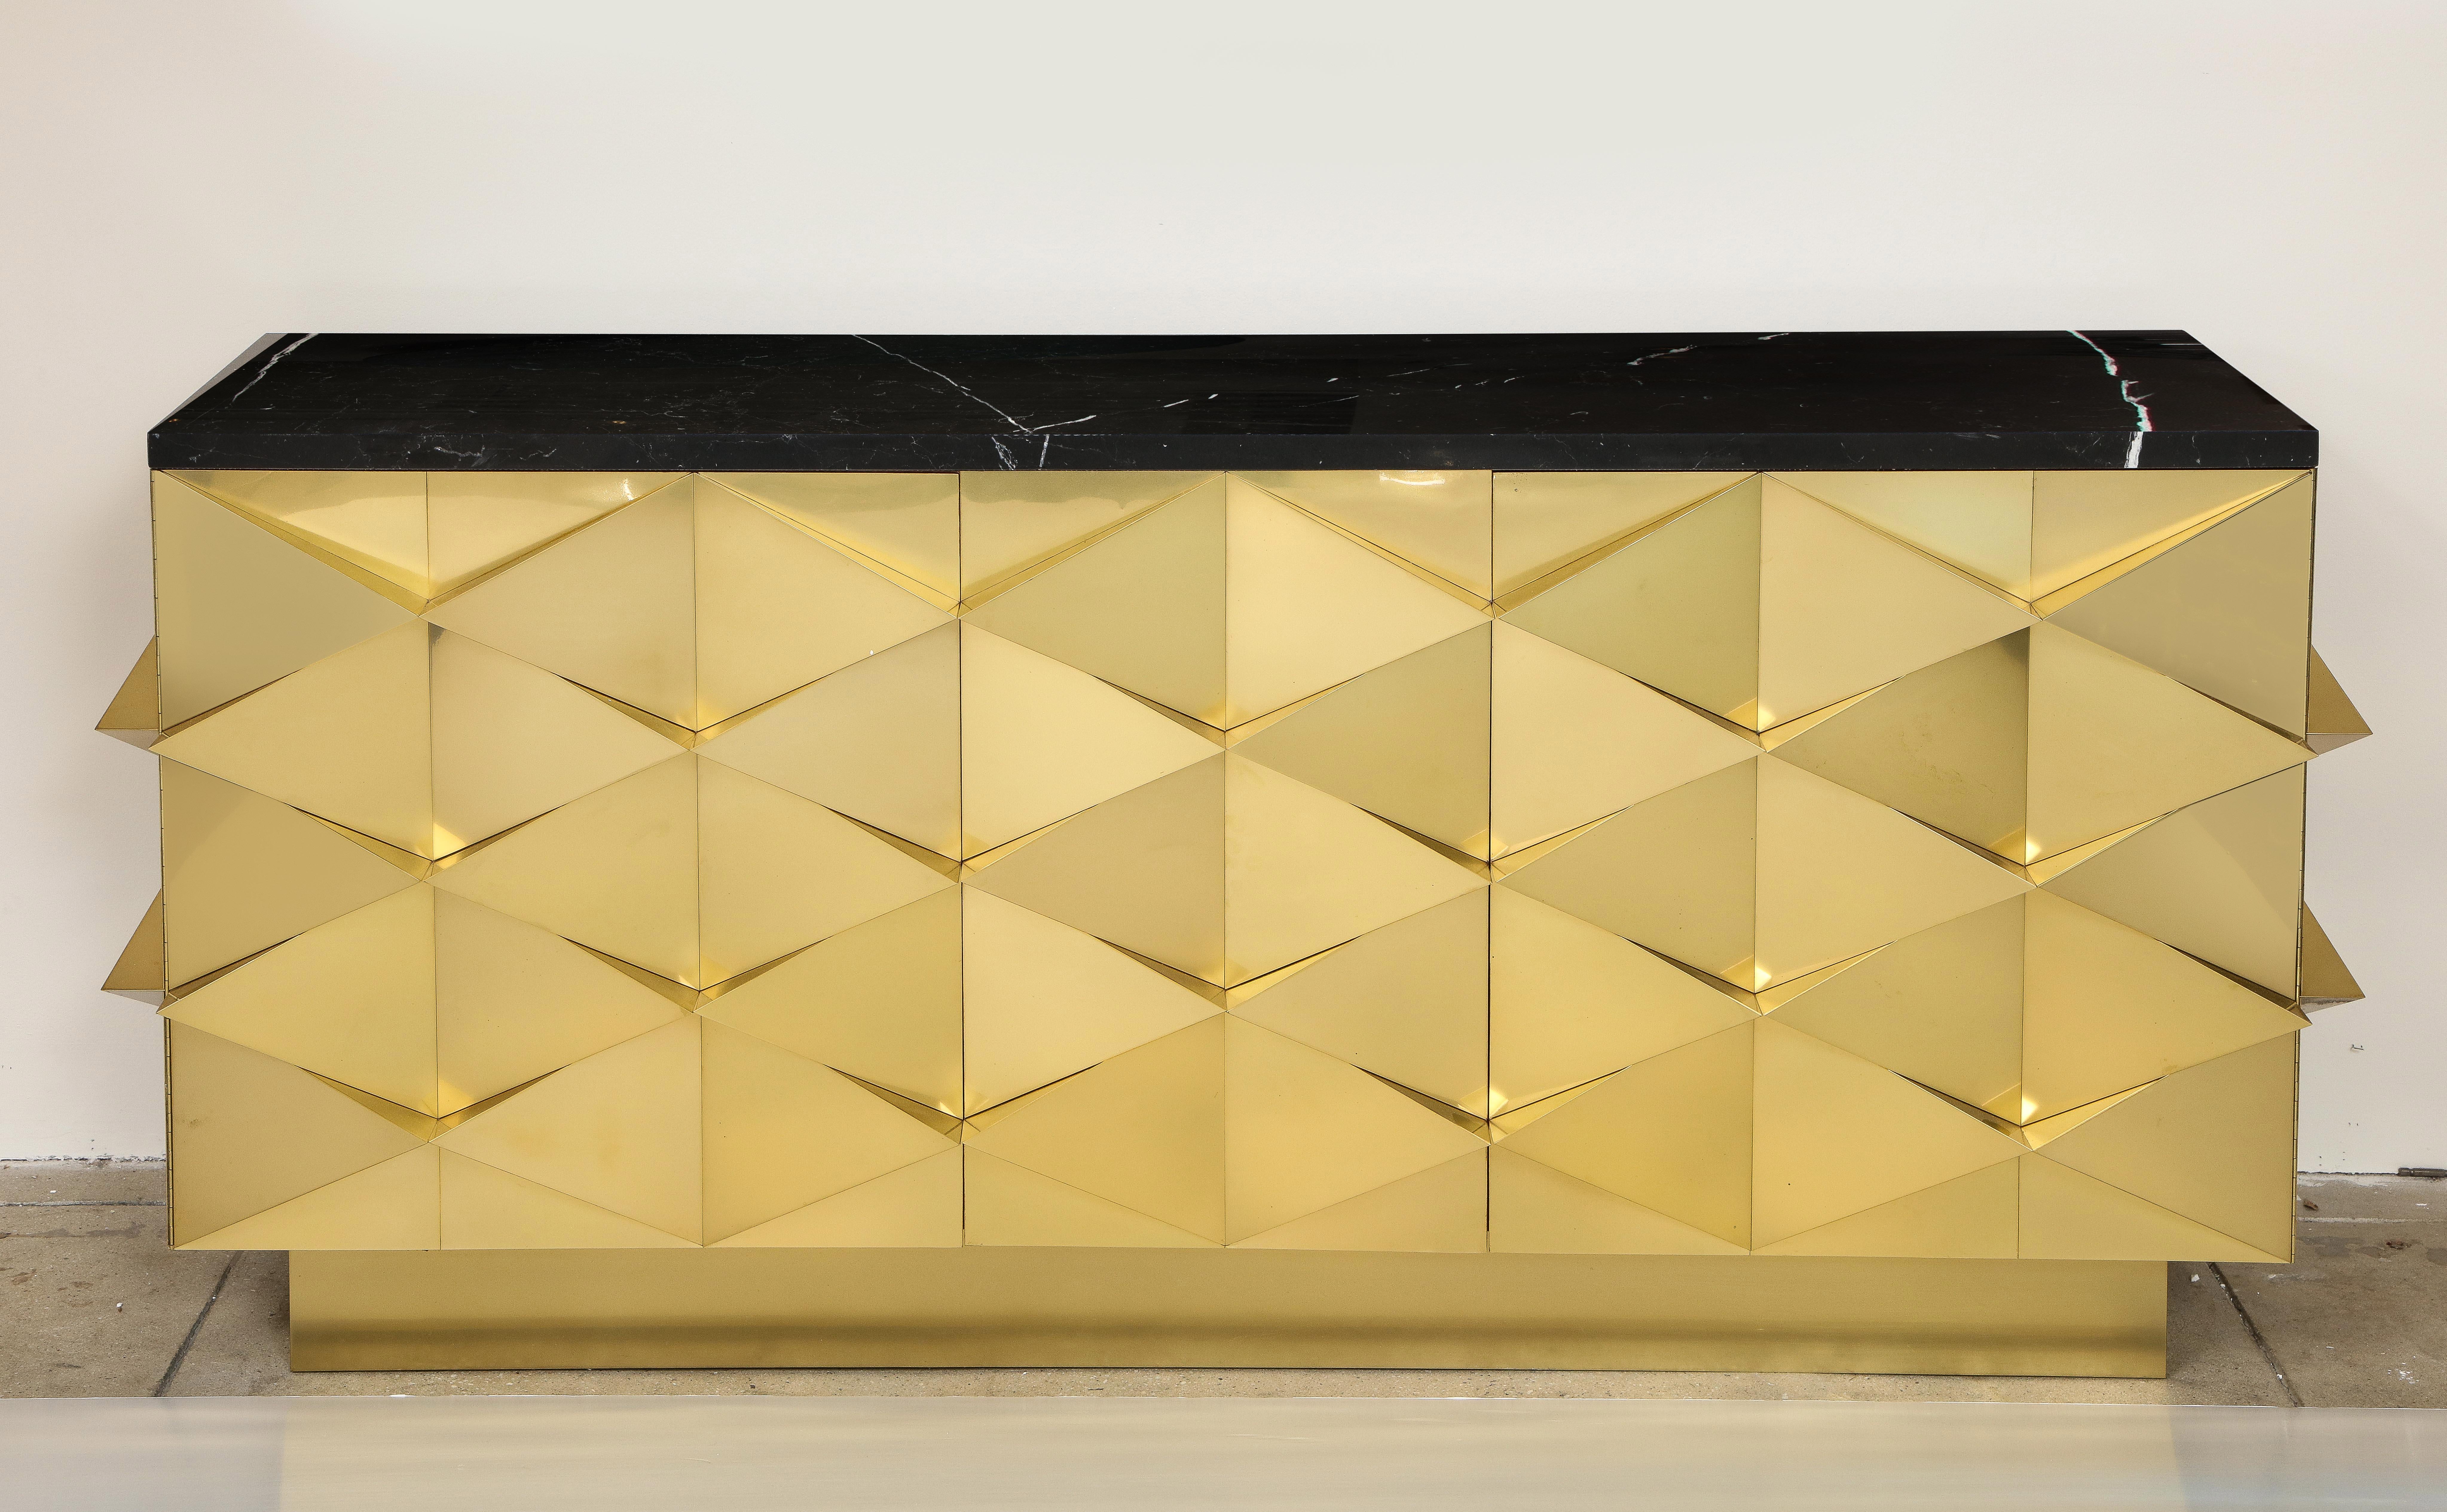 Bespoke lacquered brass and black Marquina marble top sideboard or credenza completely hand-crafted by a master artisan in Italy, 2022. Handcrafted wooden cabinet with projecting geometric shapes is clad or veneered in lacquered brass, creating a